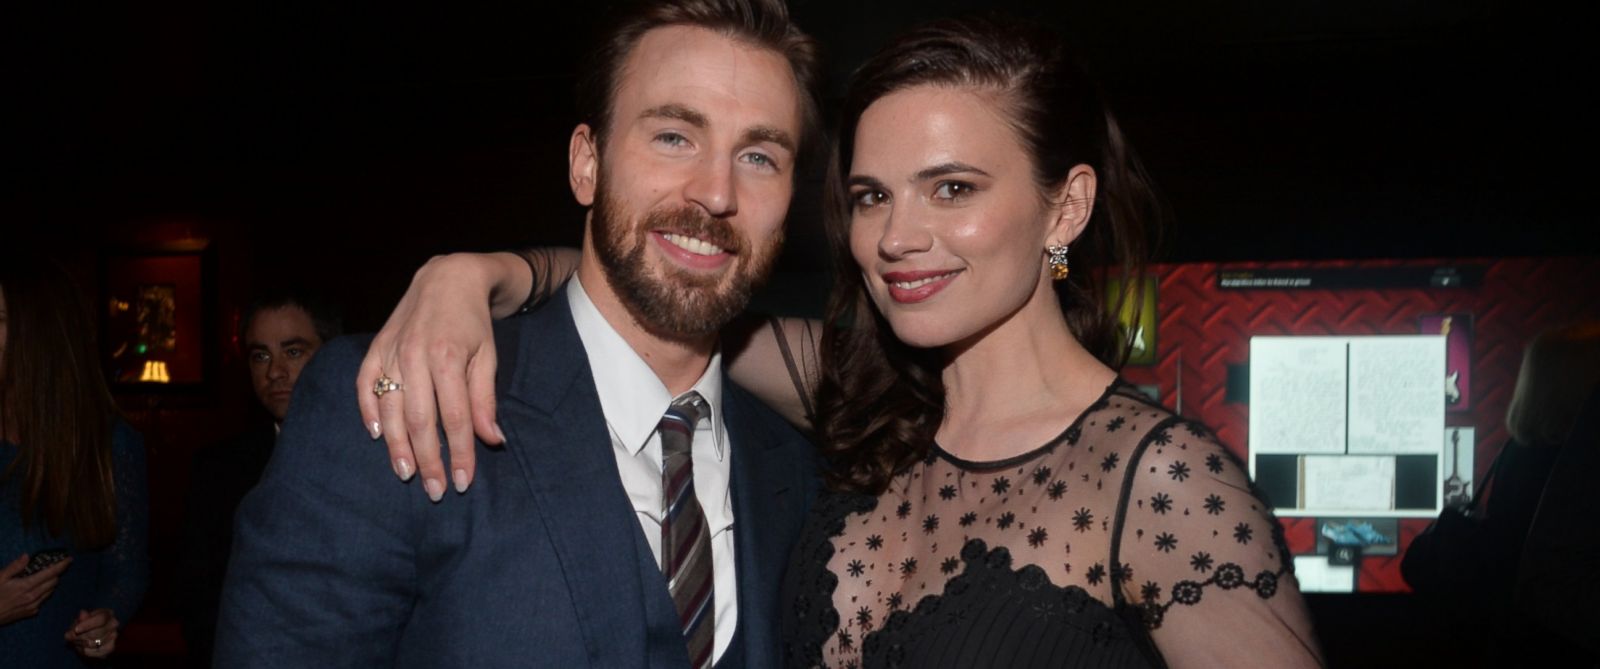 Chris Evans and Hayley Atwell Become Part of Surprise Proposal During